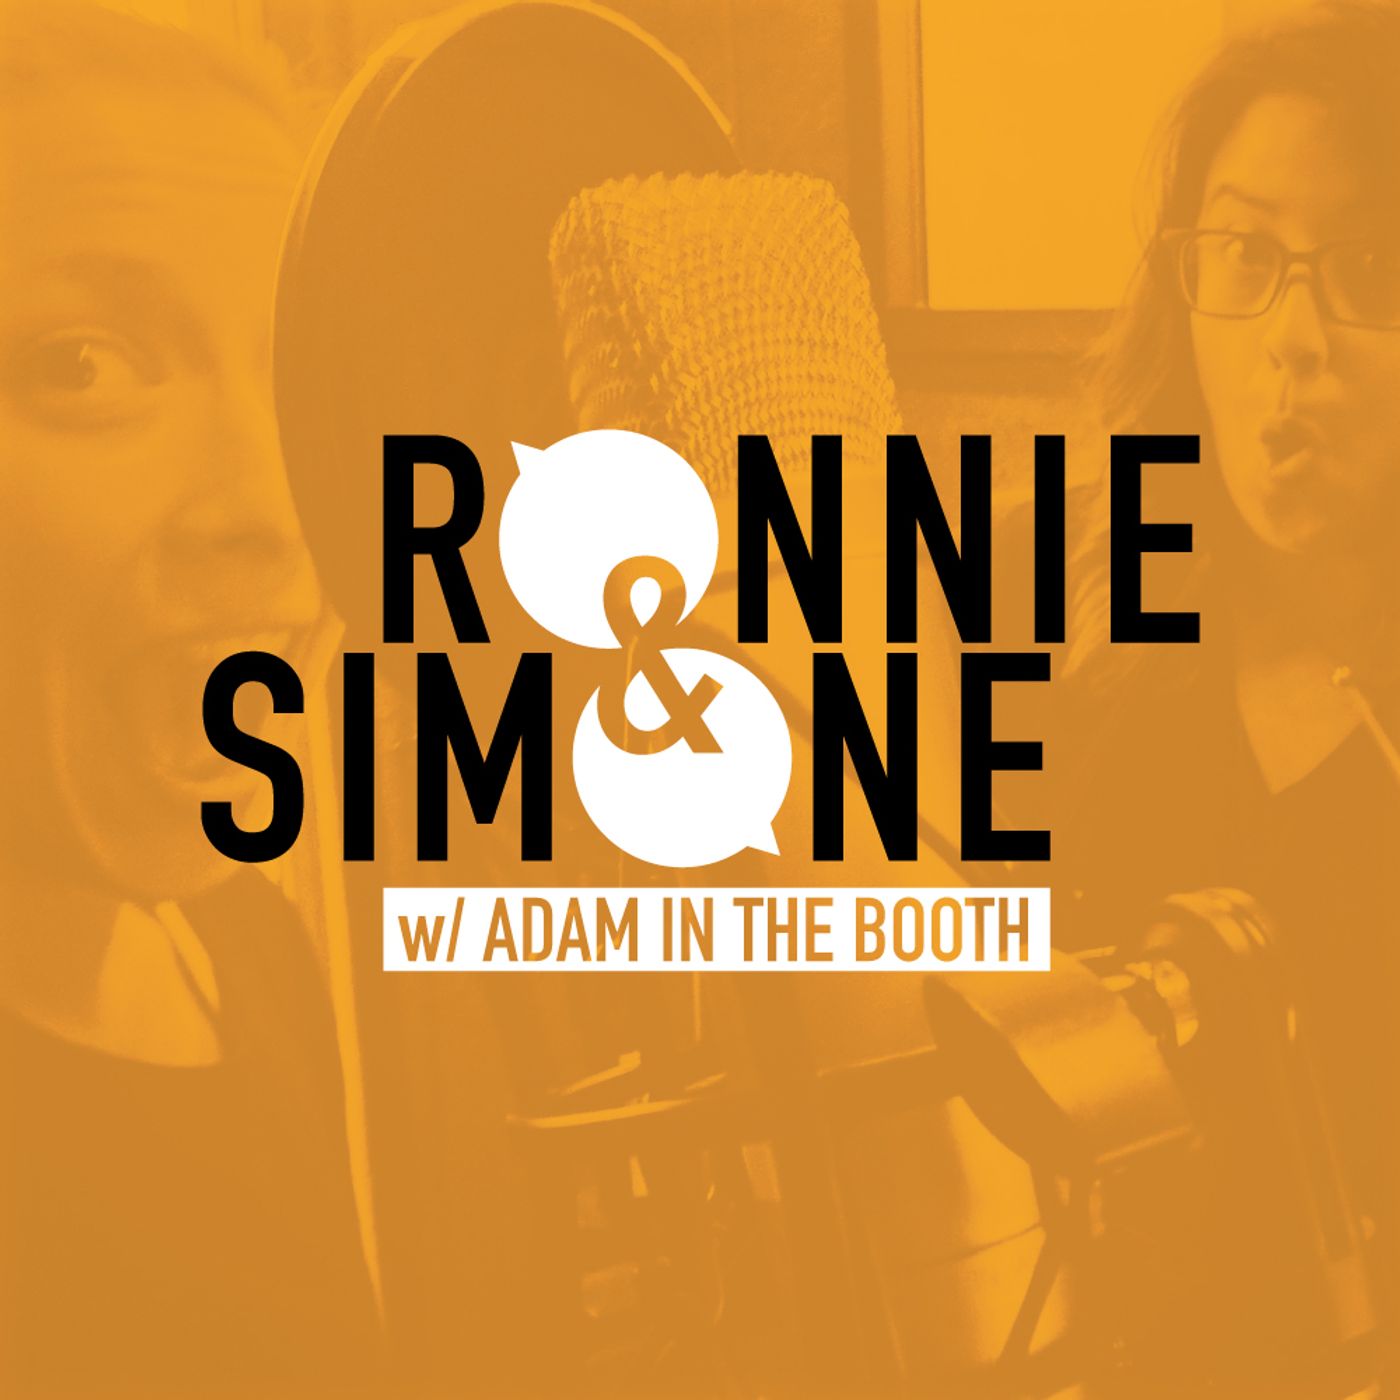 Ronnie + Simone Talk to People and Learn Things